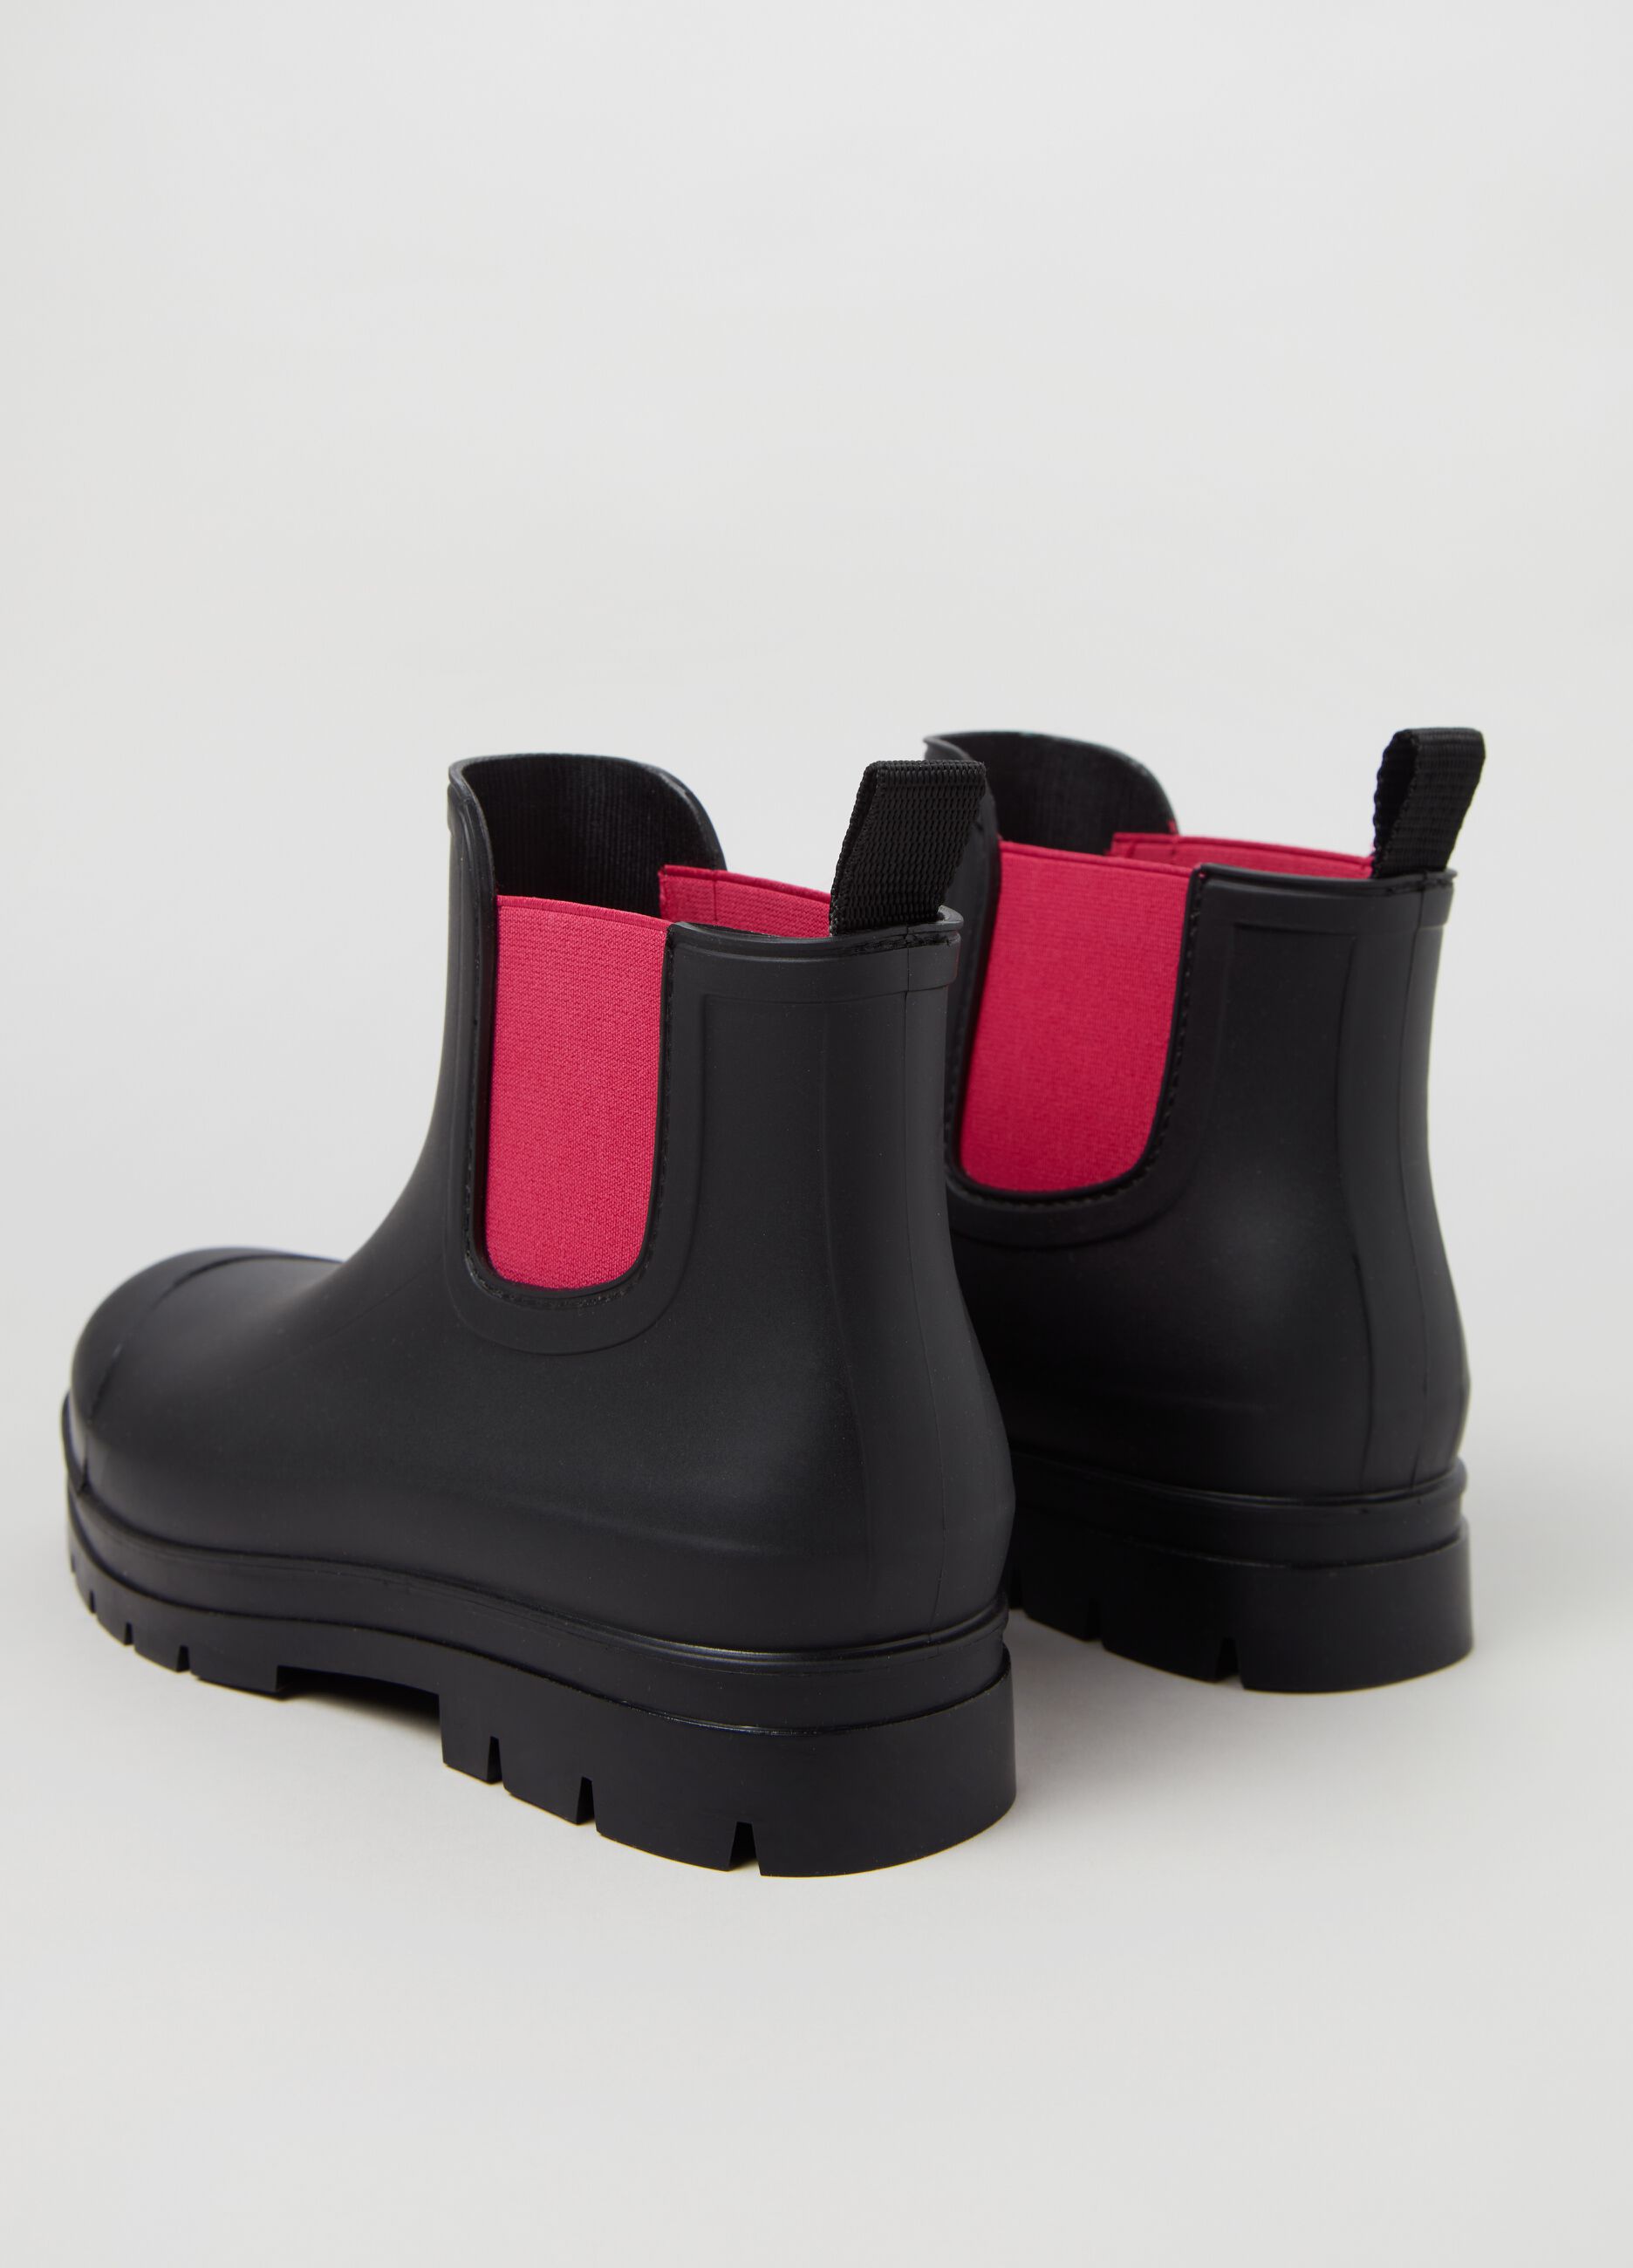 Waterproof boots with contrasting colour bands